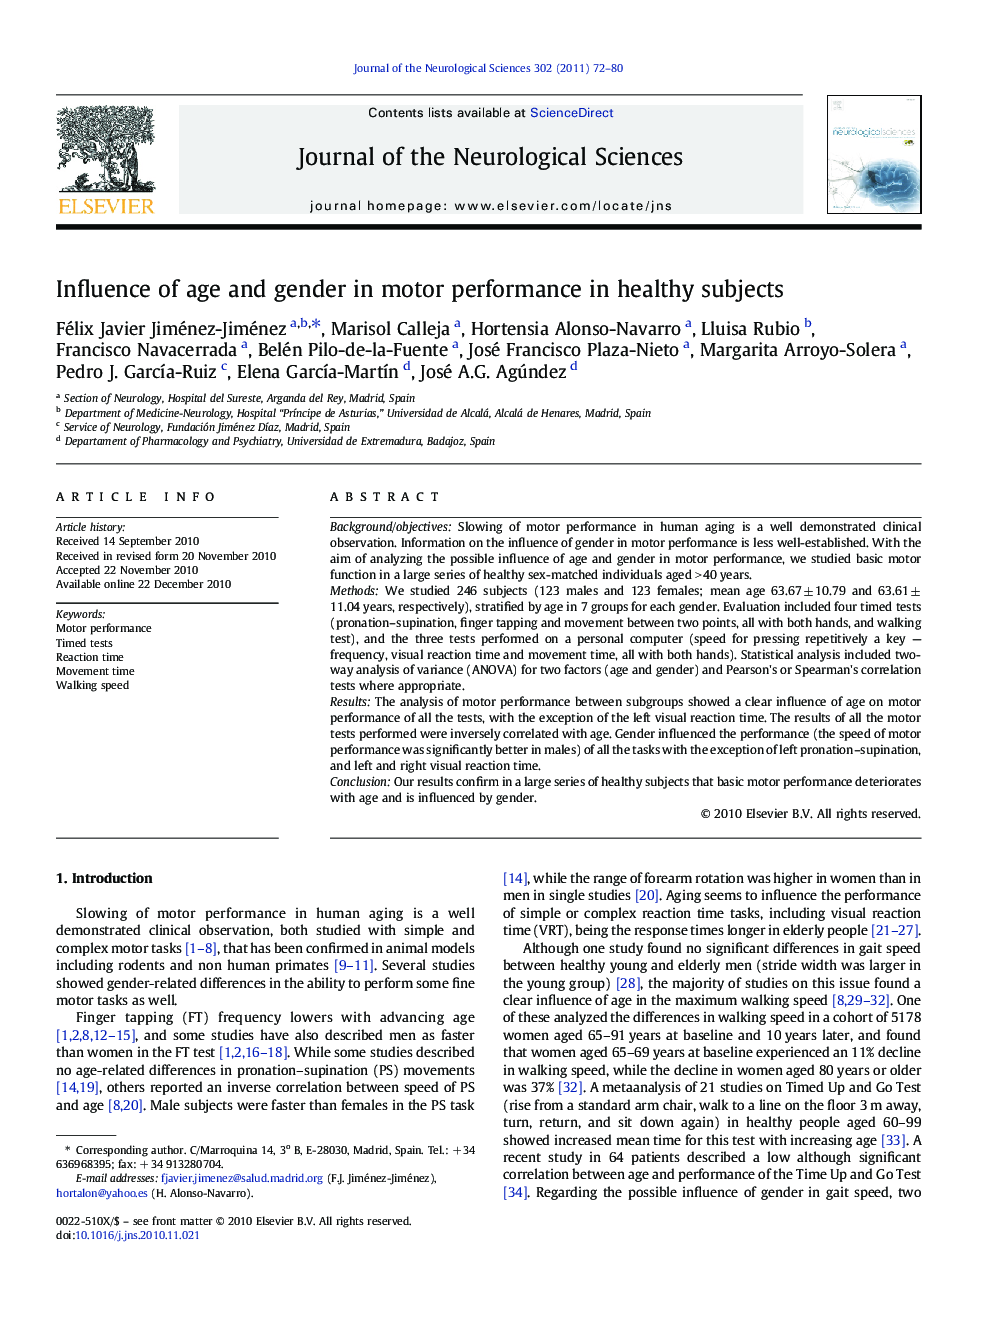 Influence of age and gender in motor performance in healthy subjects